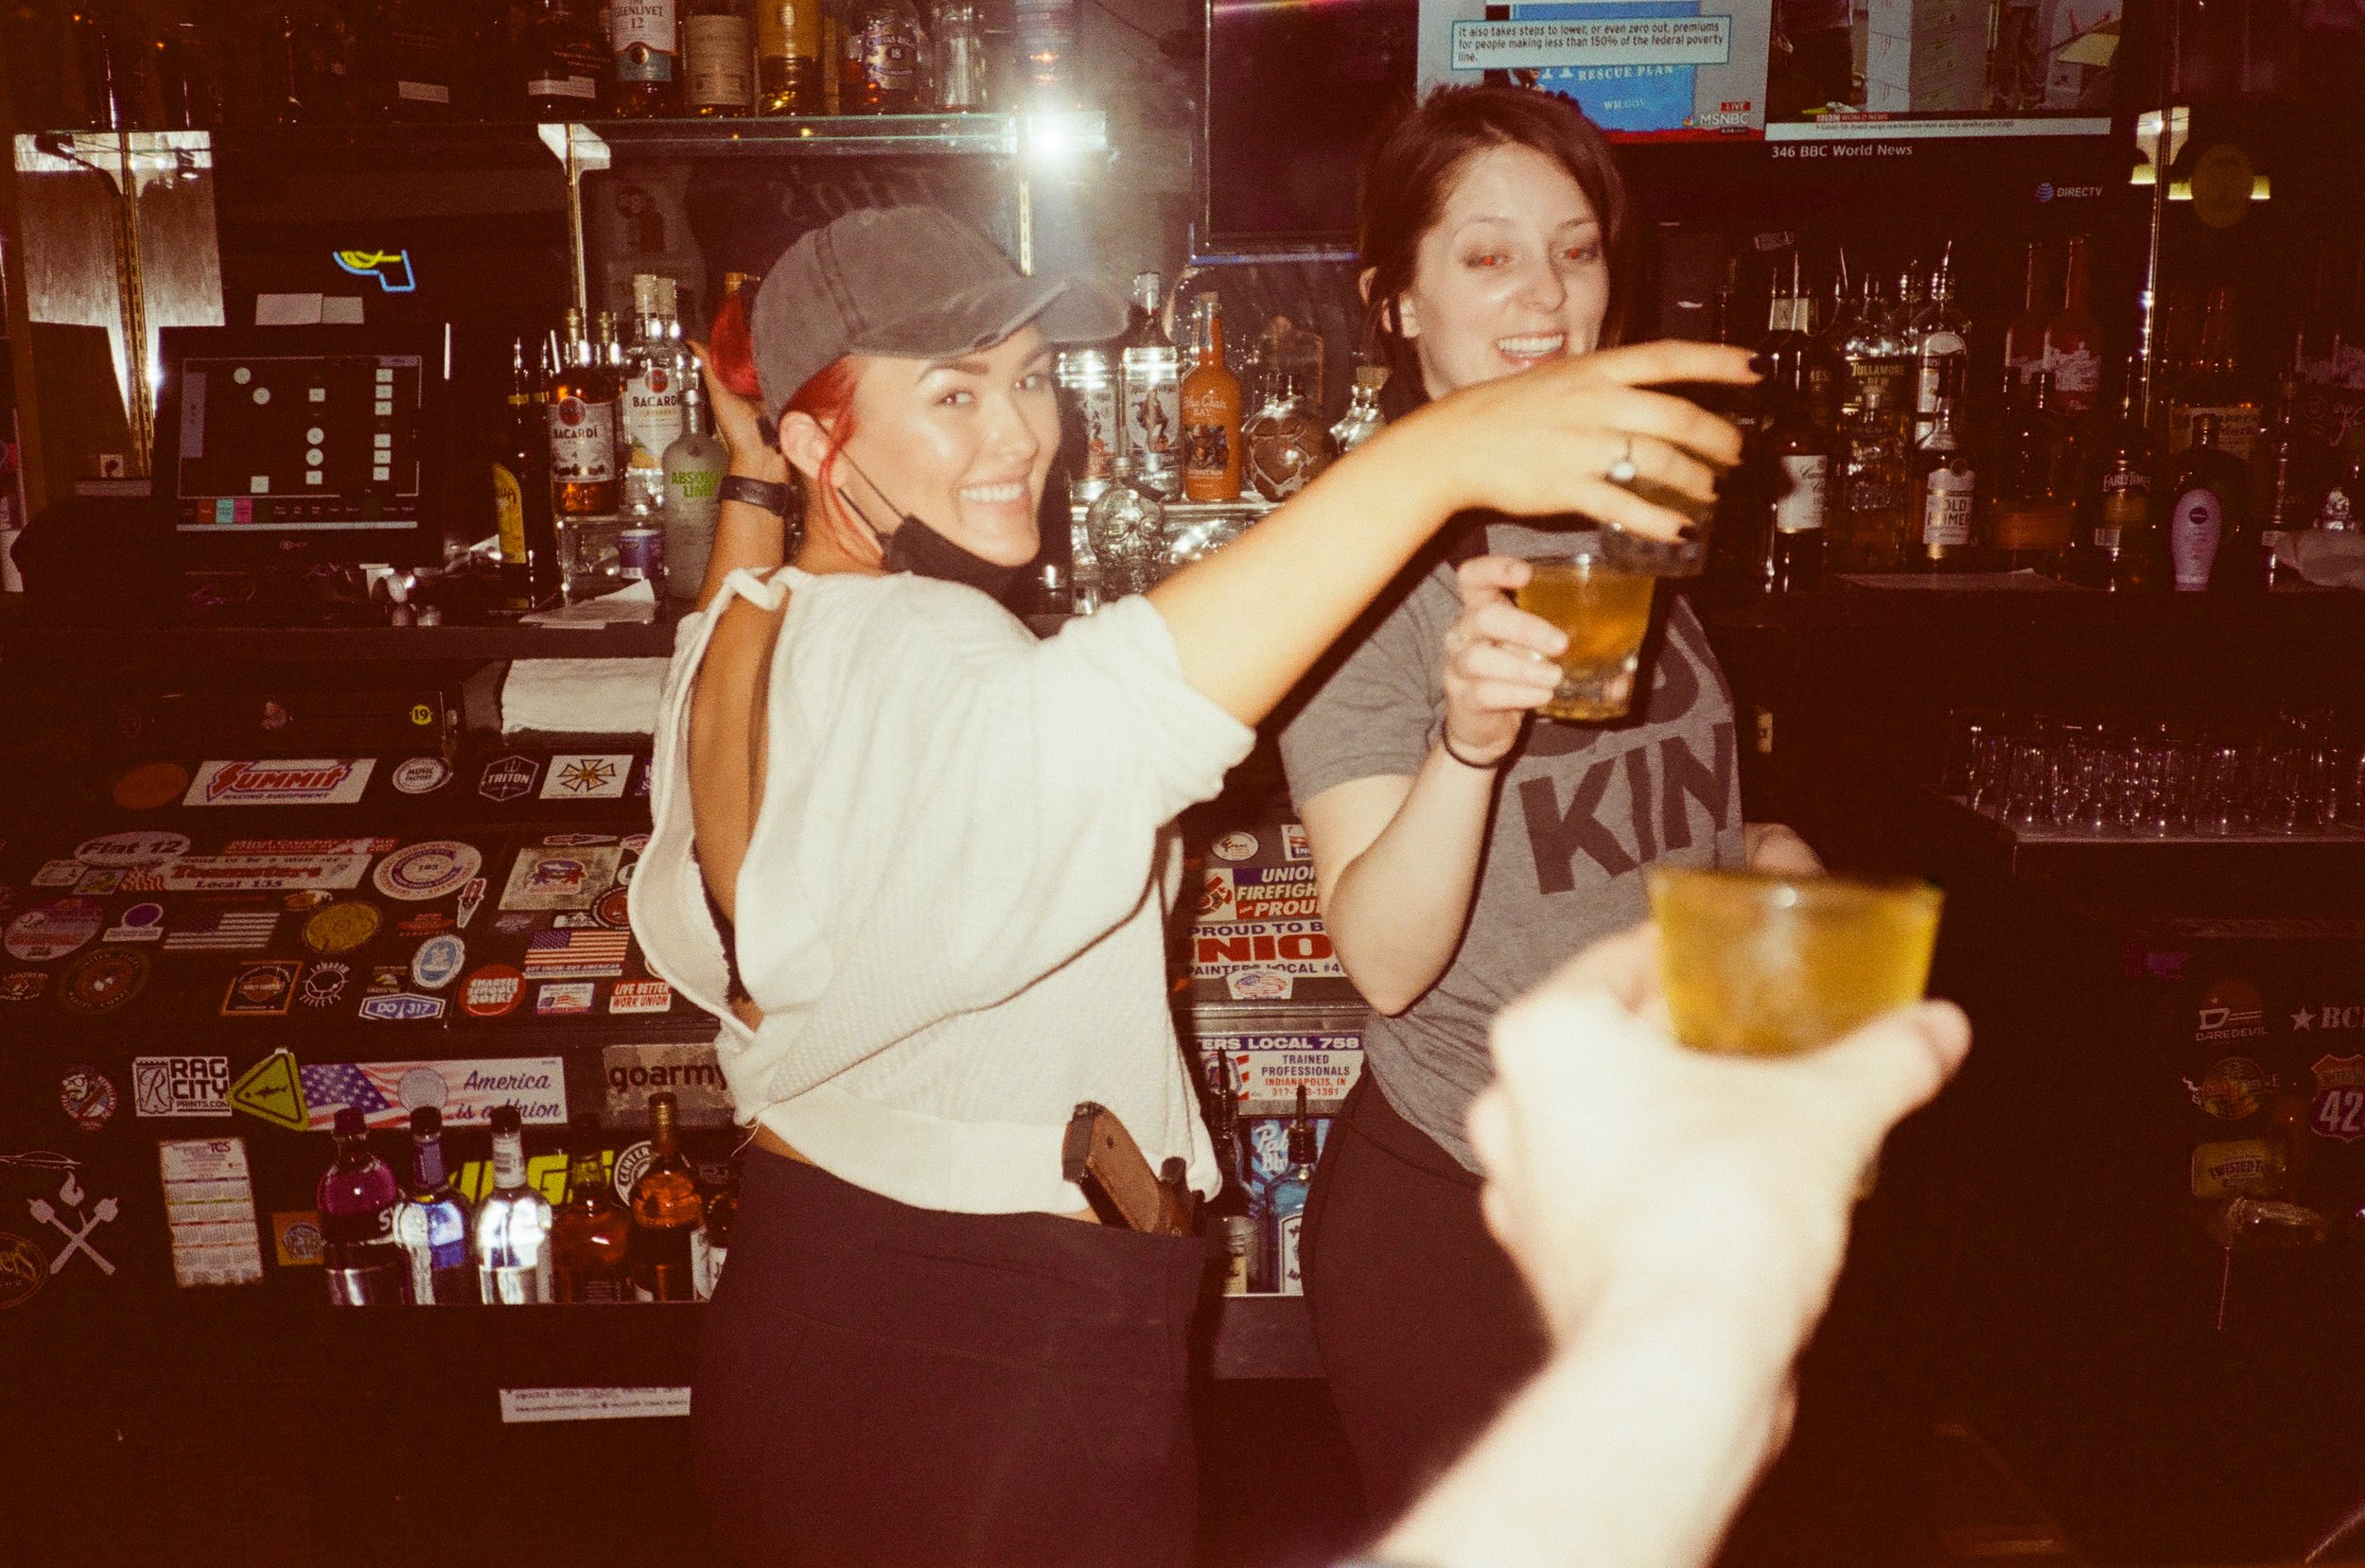  Megan and Brooke are two of the finest bartenders in town. As you can tell from the photo, they take no shit!  Camera: Fuji Discovery Mini Dual  Film: Kodak Gold 200 (expired) 